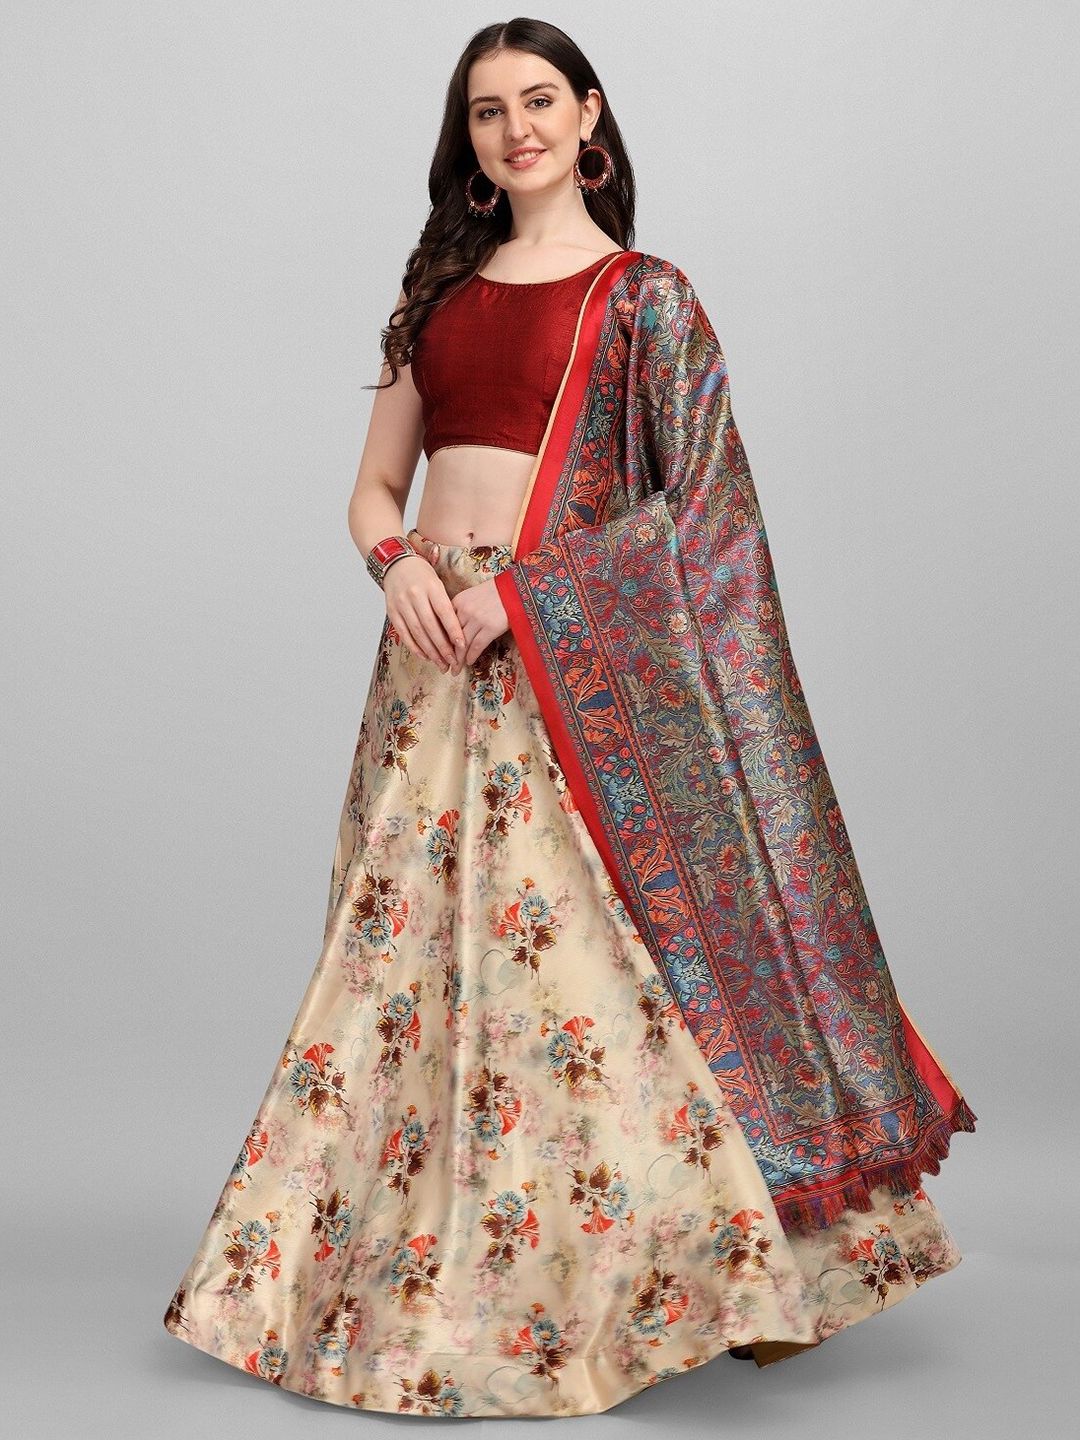 Fashion Basket Beige & Green Semi-Stitched Lehenga & Unstitched Blouse With Dupatta Price in India